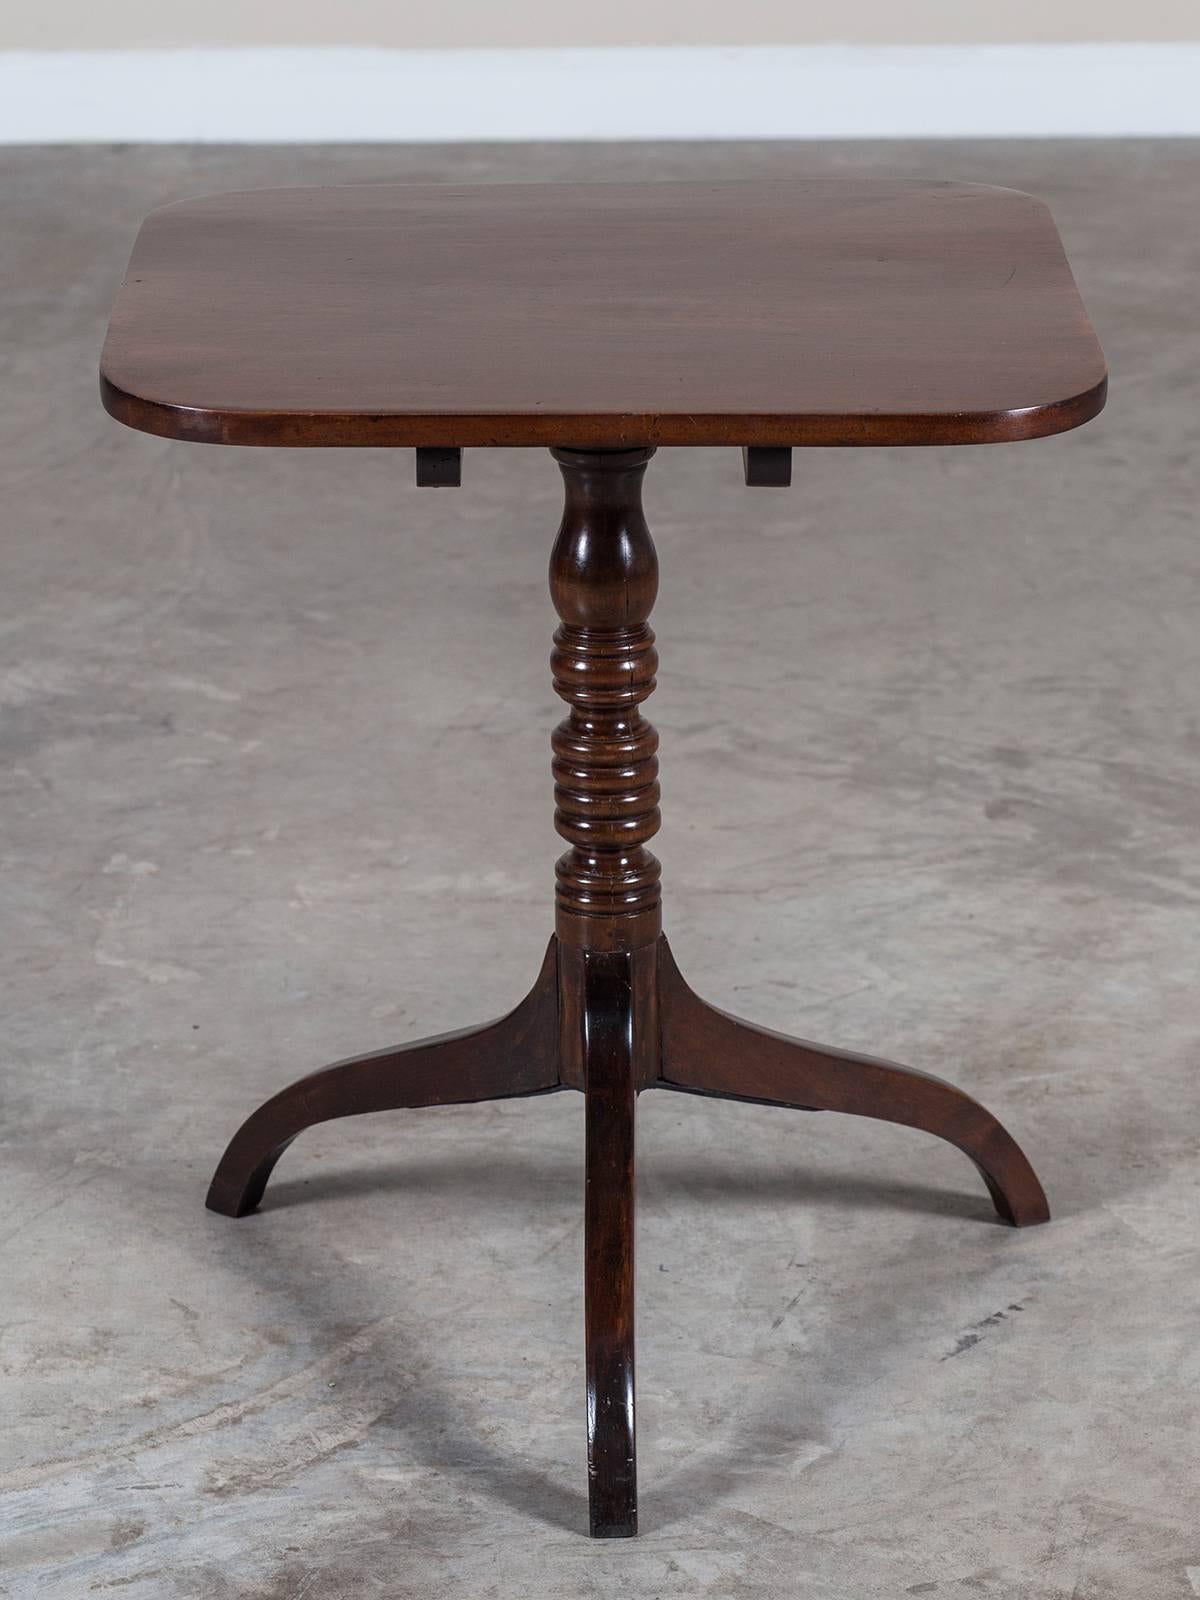 Hand-Carved Antique English George III Mahogany Tilt-Top Table, circa 1800